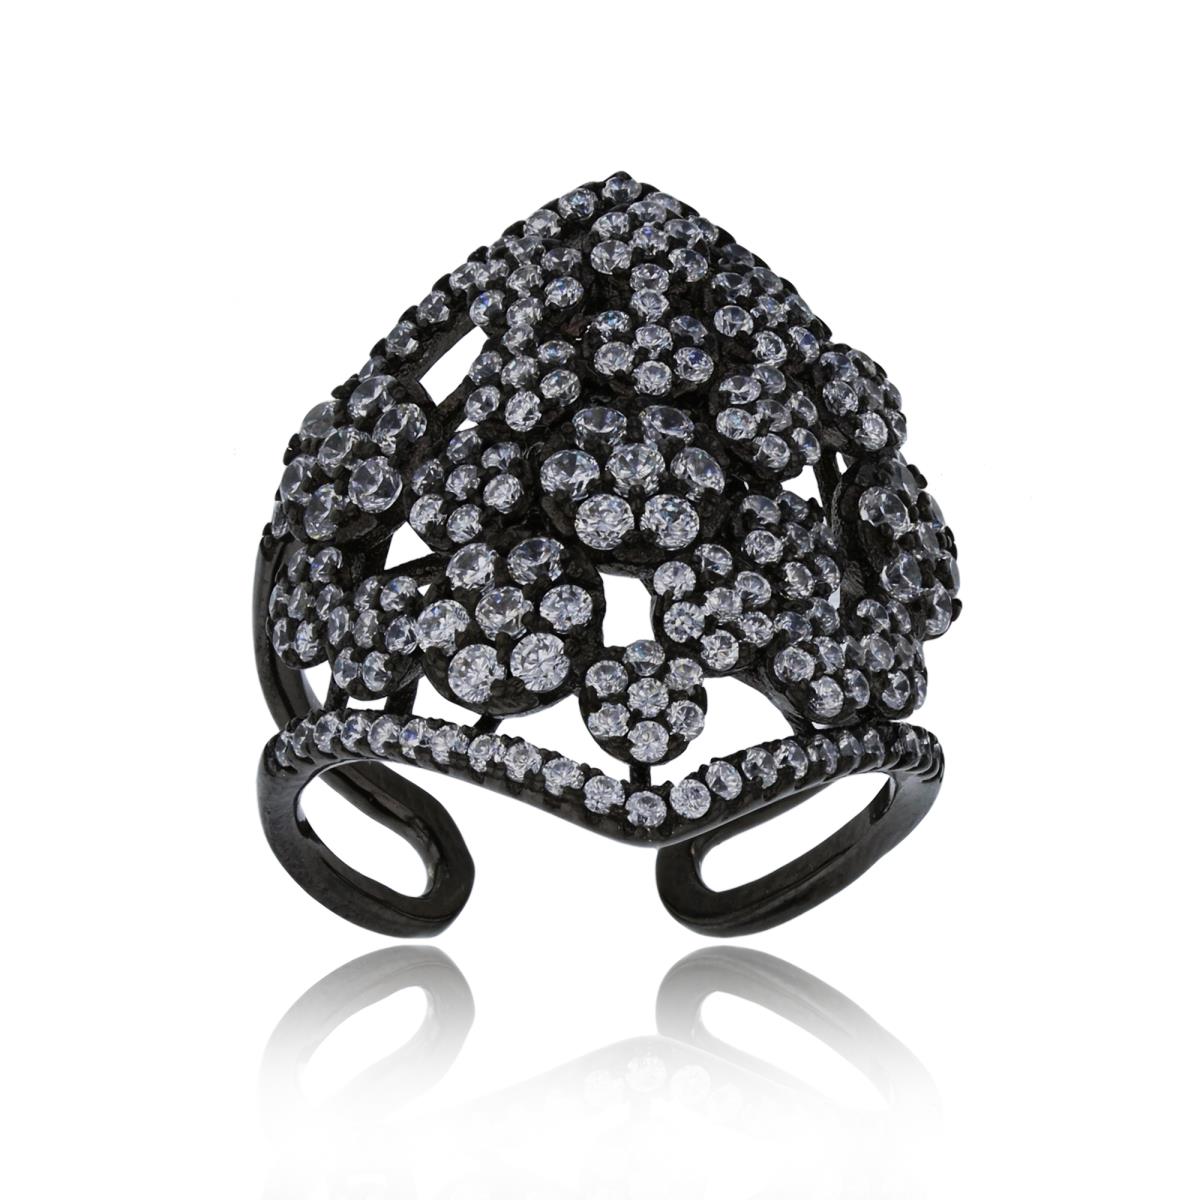 Sterling Silver Black Micropave Cluster Flowers Adjustable Fashion Ring